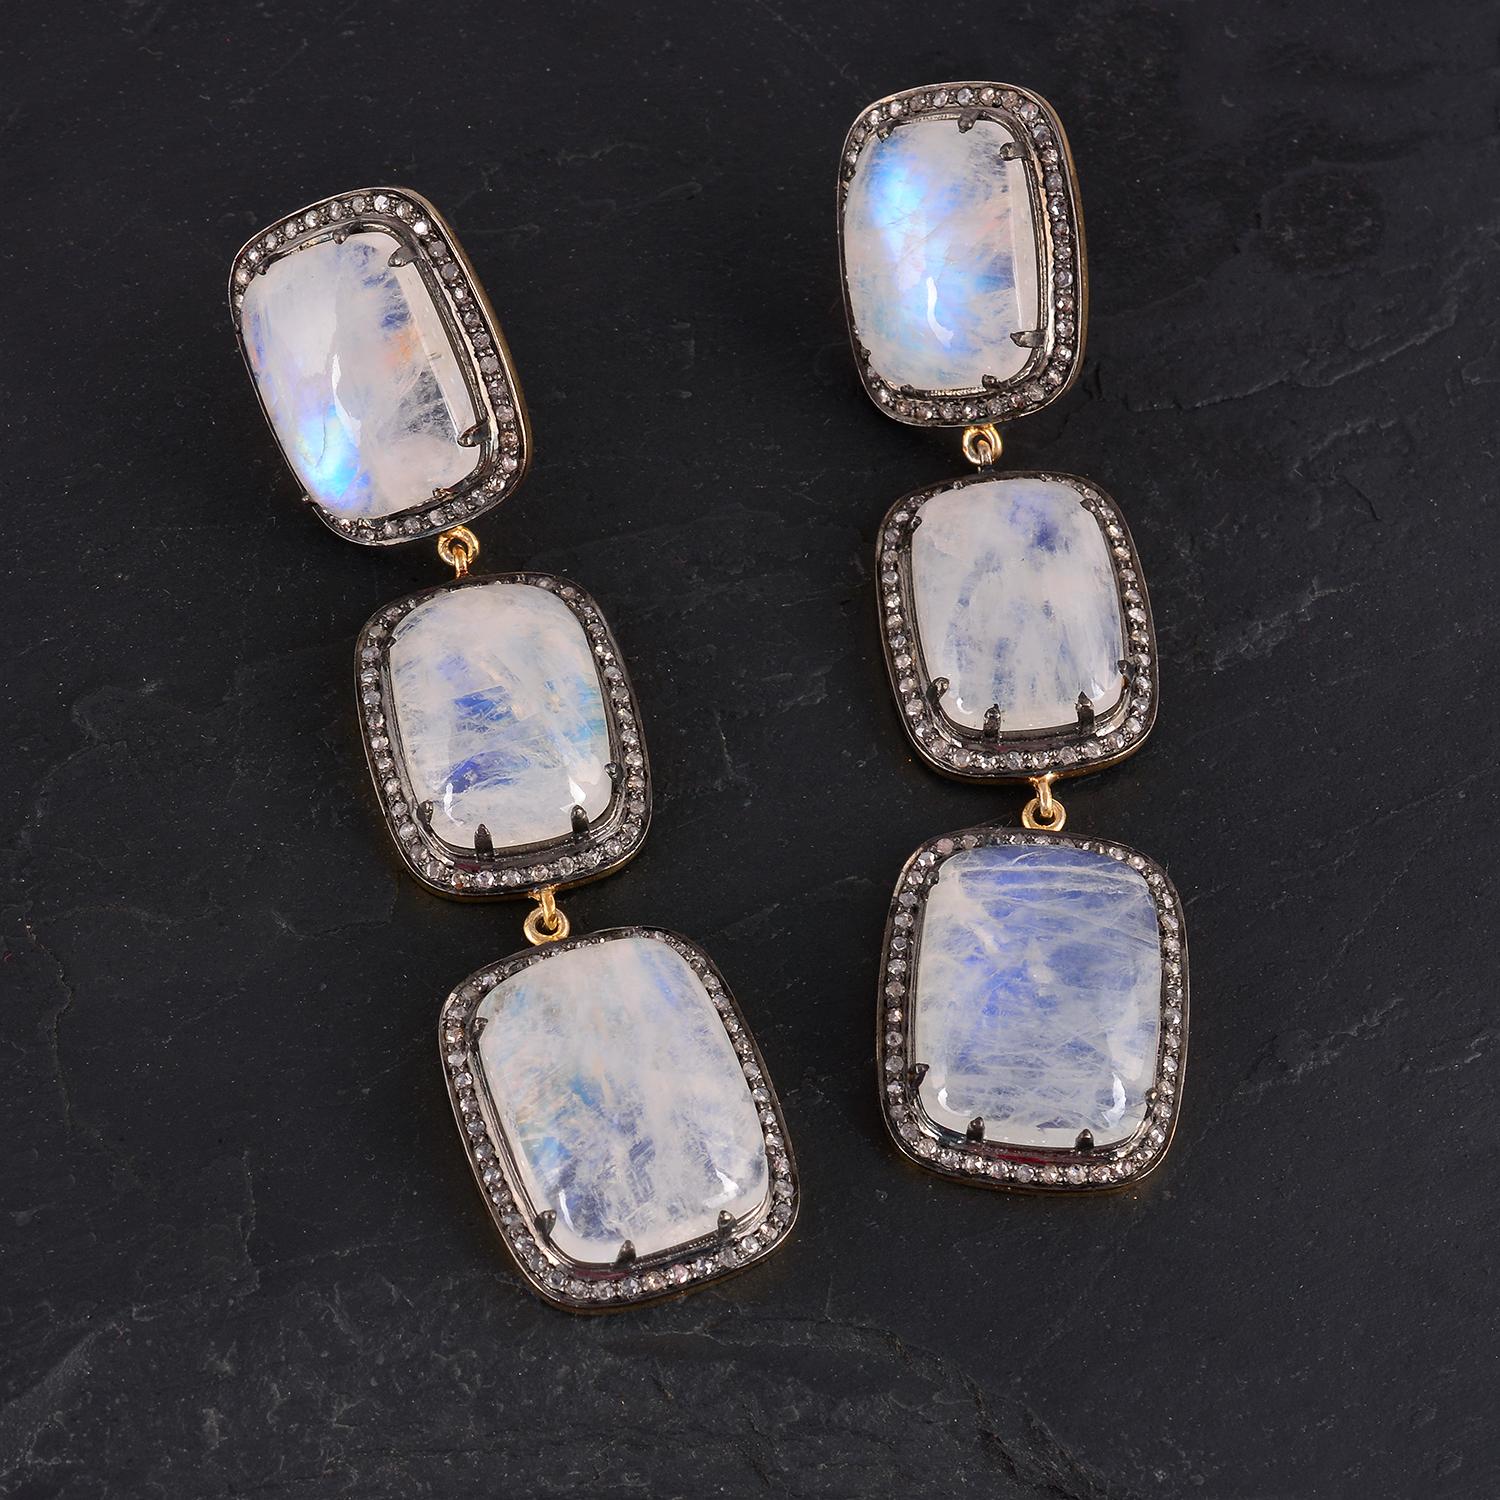 Total Gross weight of the earring worth 34.74 grams Gold with 0.29 grams and 925 sterling silver with 18.724 grams.
Rainbow moonstone is thought to bring balance, harmony and hope while enhancing creativity, compassion, endurance and inner